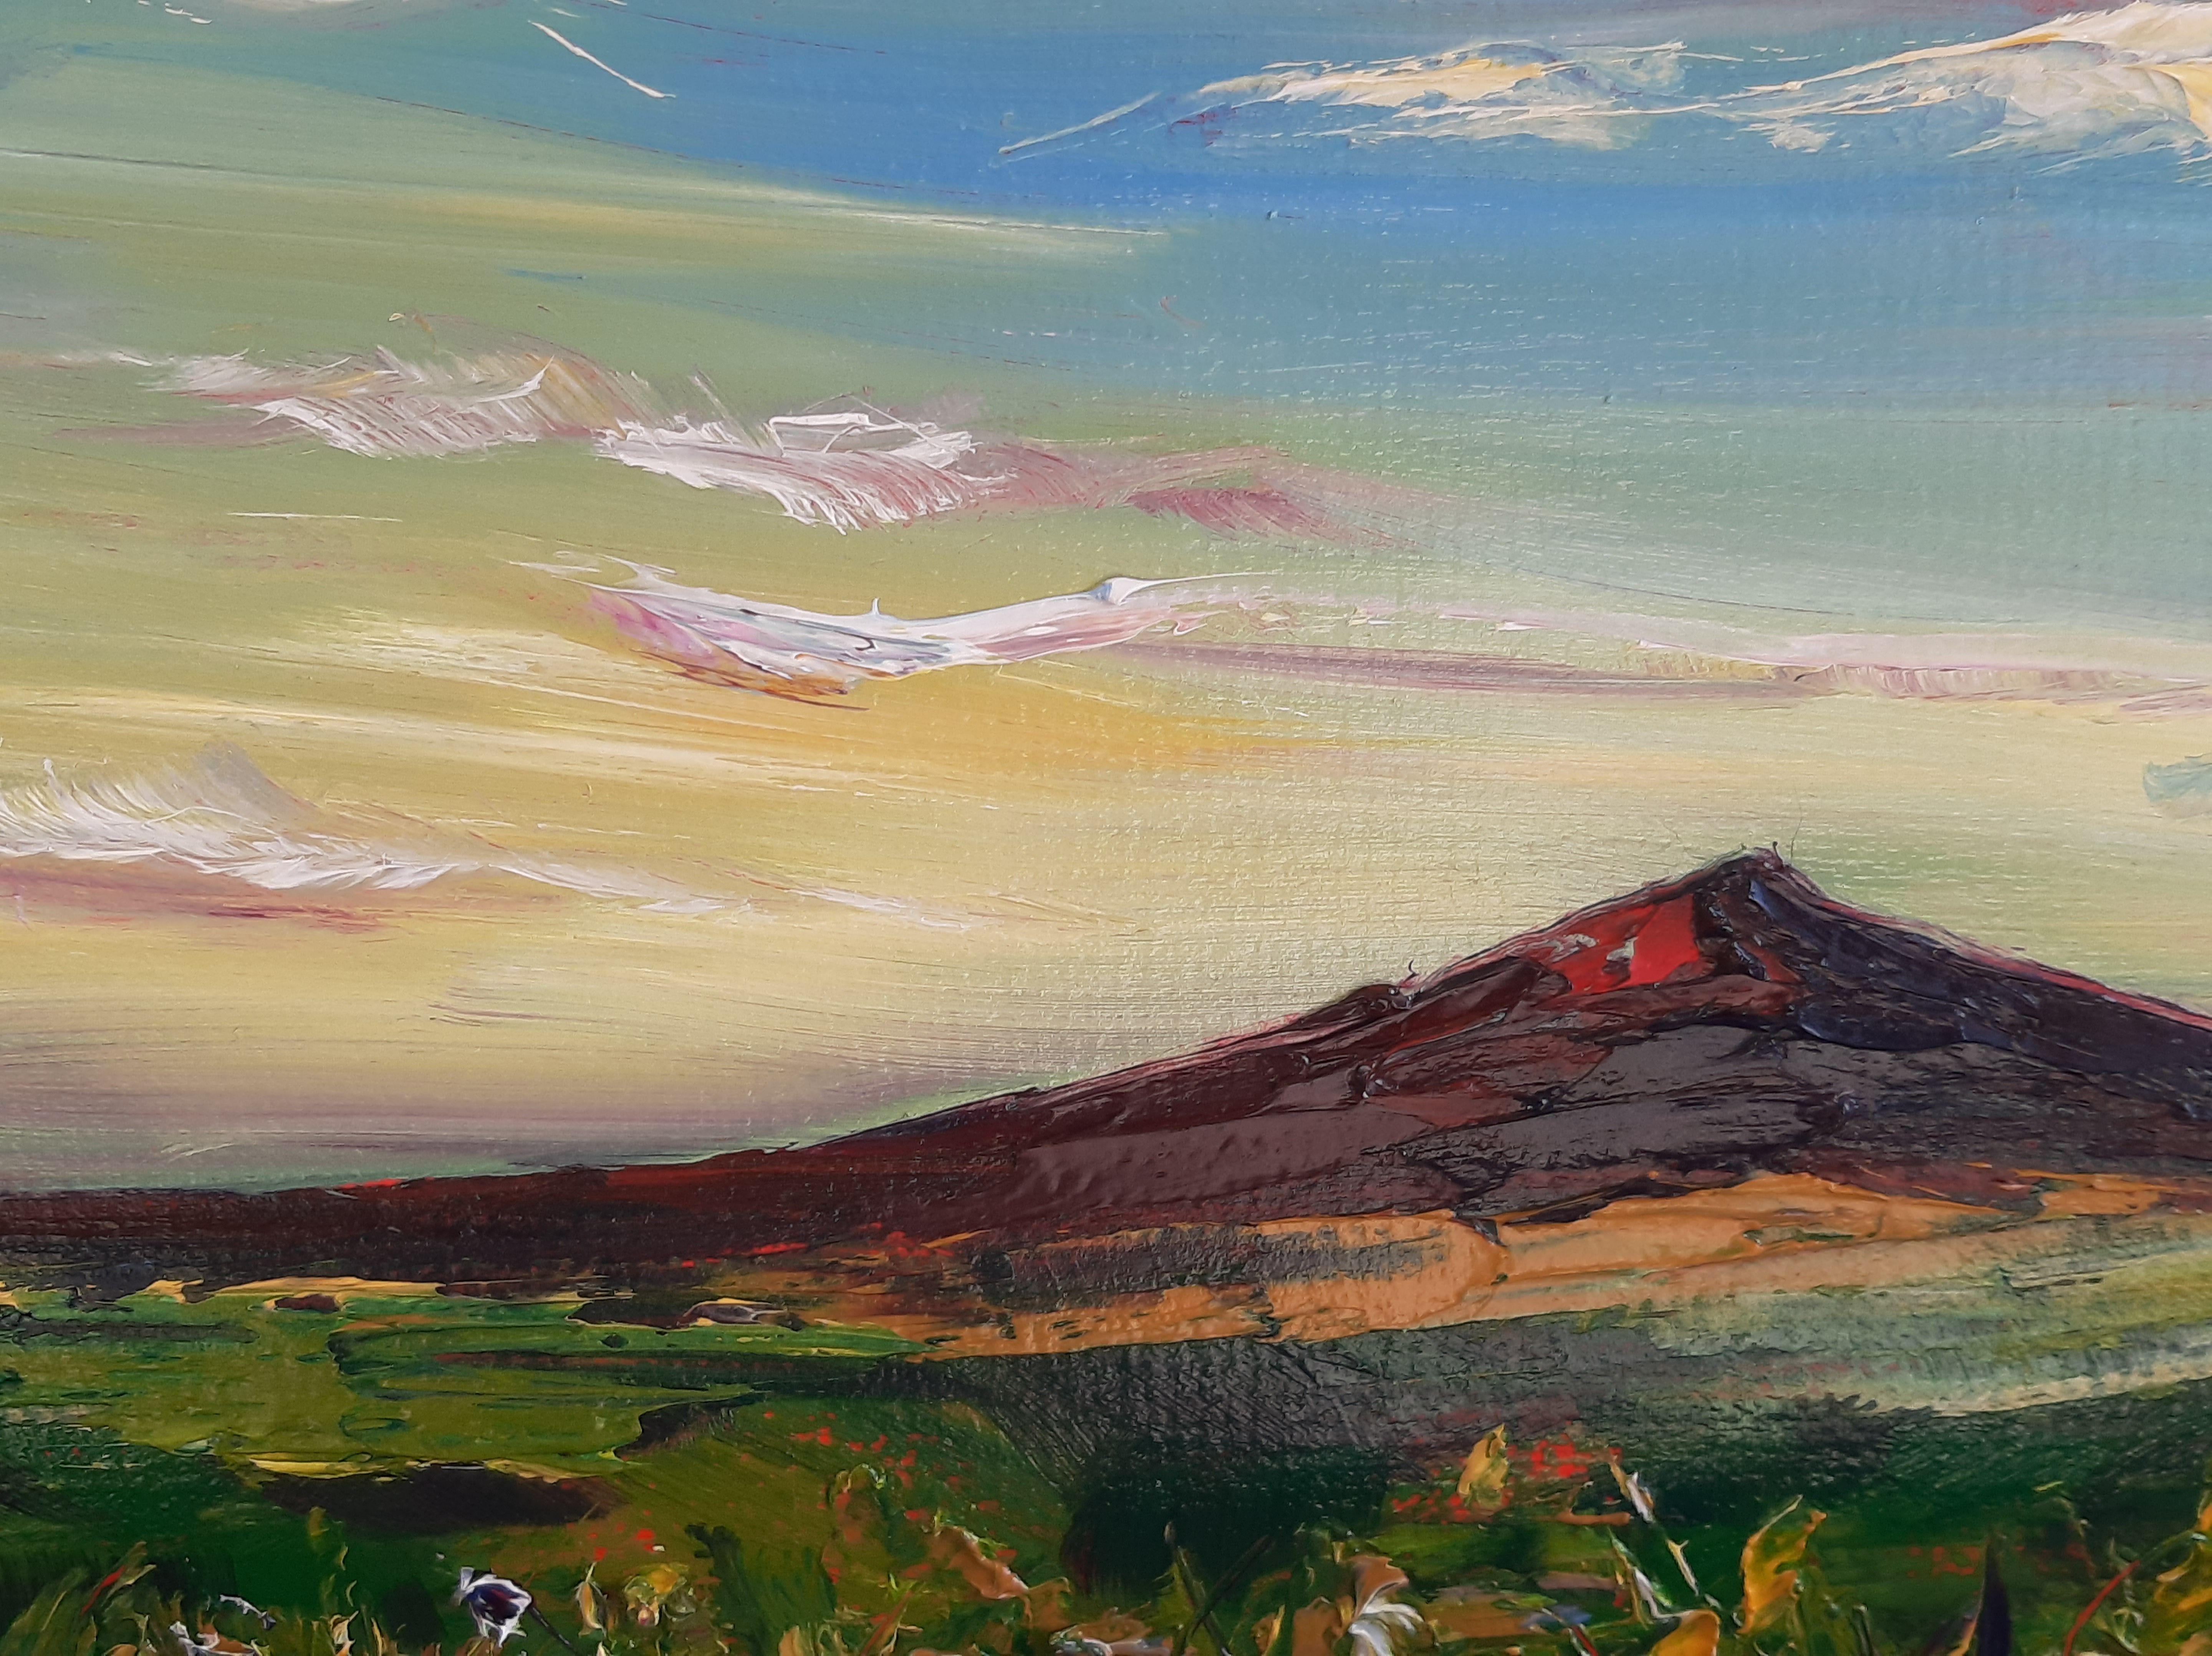 Into the Sun is a painting of the distant slopes of Croghan Mountain on the borders of Wicklow and Wexford, I am lucky enough to have a view of this mountain from my garden..  Into the Sun is filled with the warm glow of sunset as it fills the sky